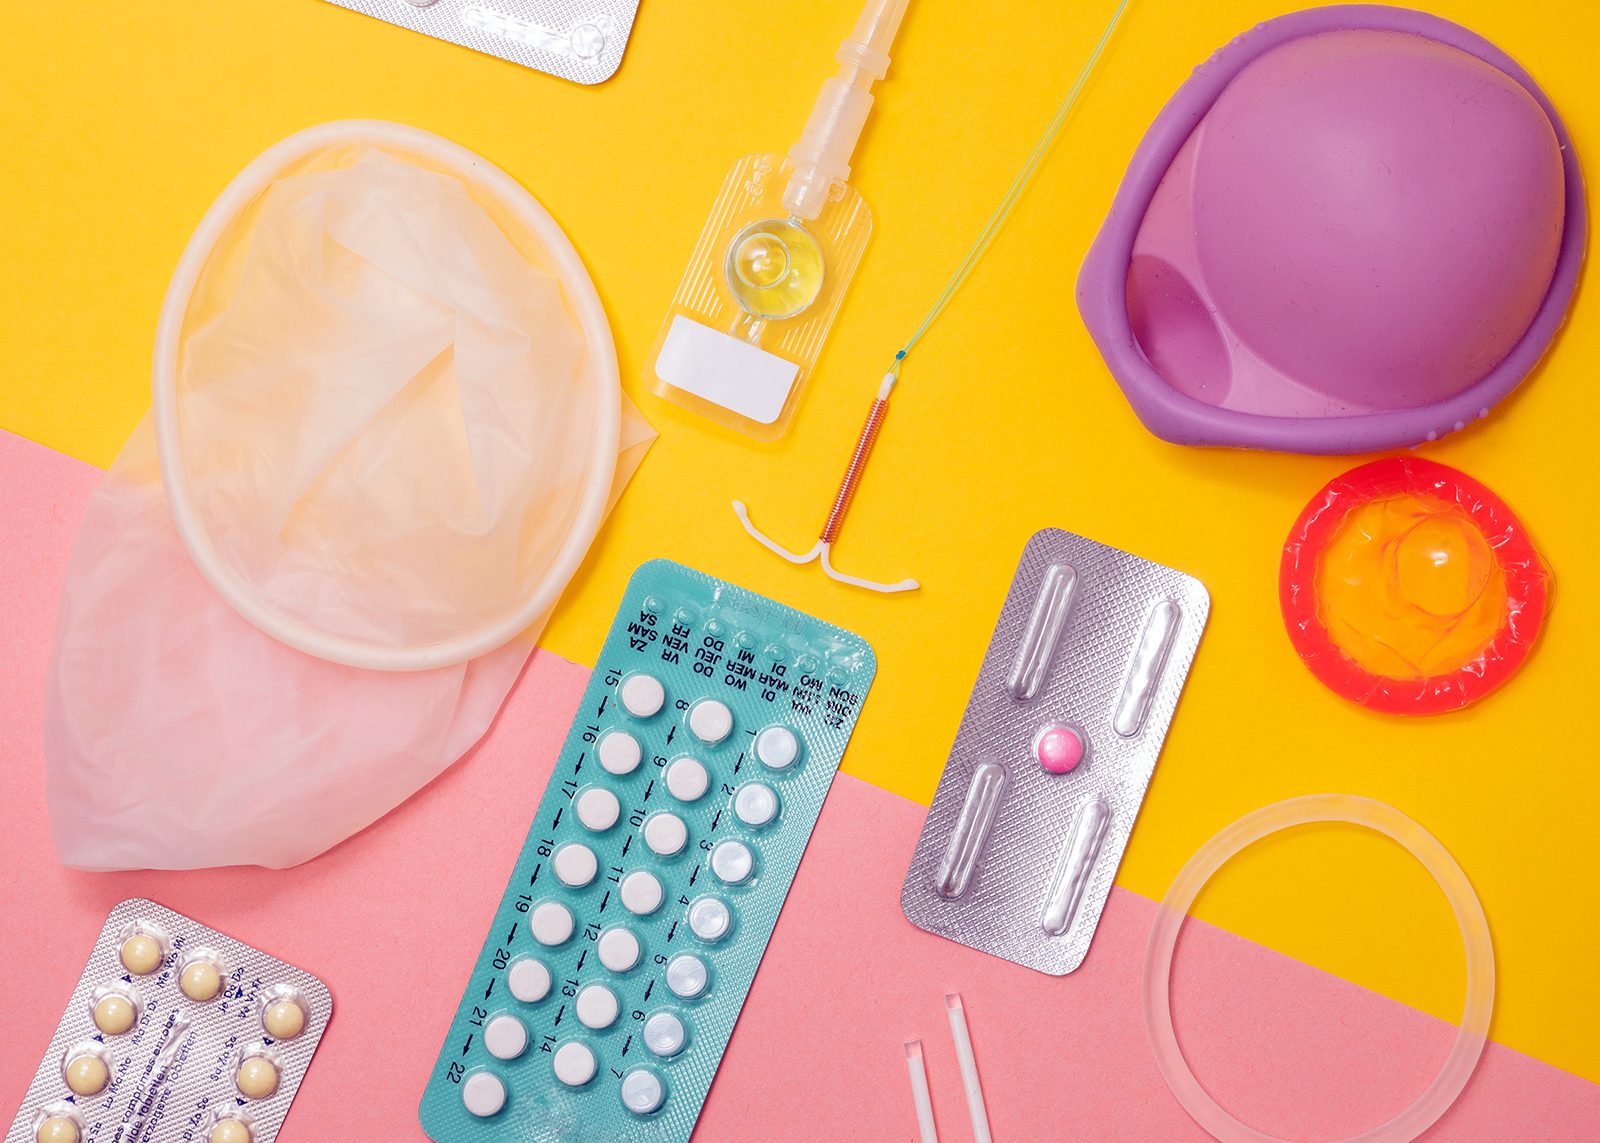 A range of contraceptive methods: contraceptive pills, emergency contraception, condom, IUD, vaginal ring, implant, etc. Photo by Reproductive Health Supplies Coalition/Unsplash/Creative Commons